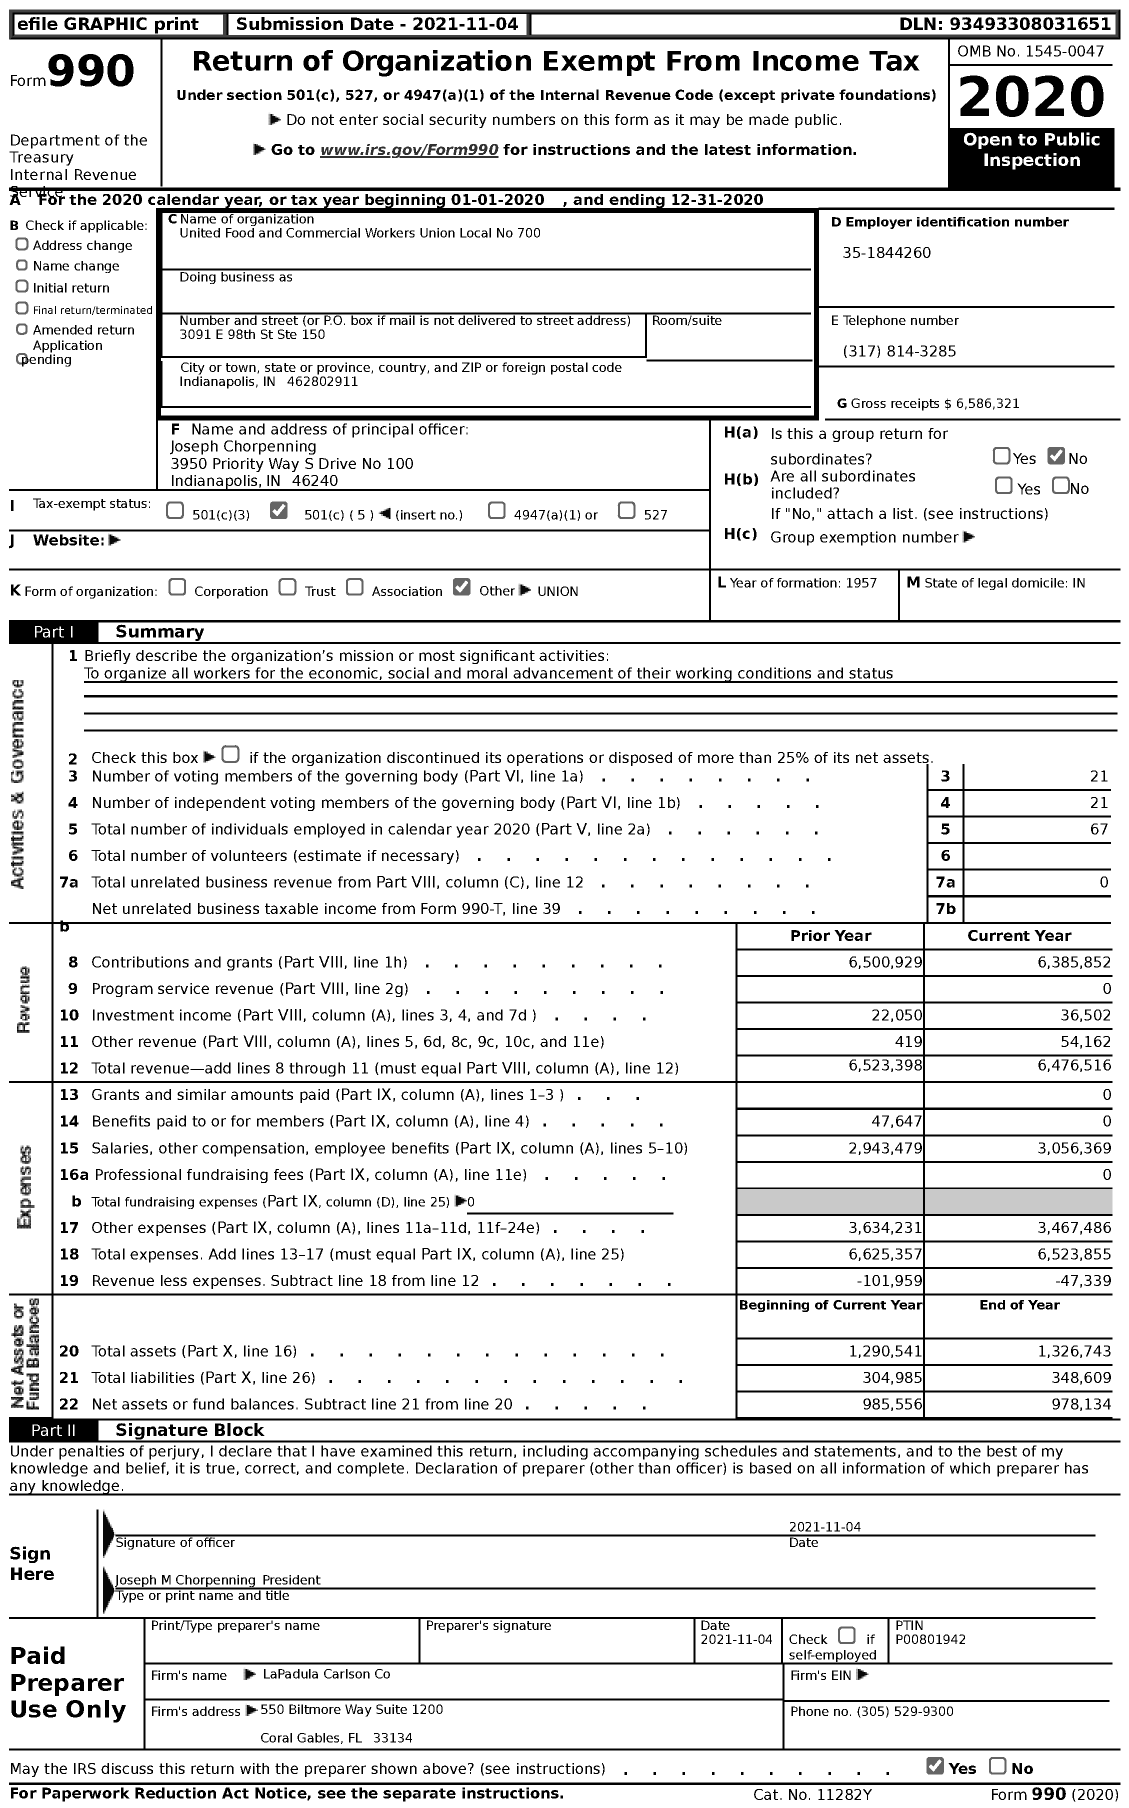 Image of first page of 2020 Form 990 for United Food & Commercial Workers Union - 700 Local